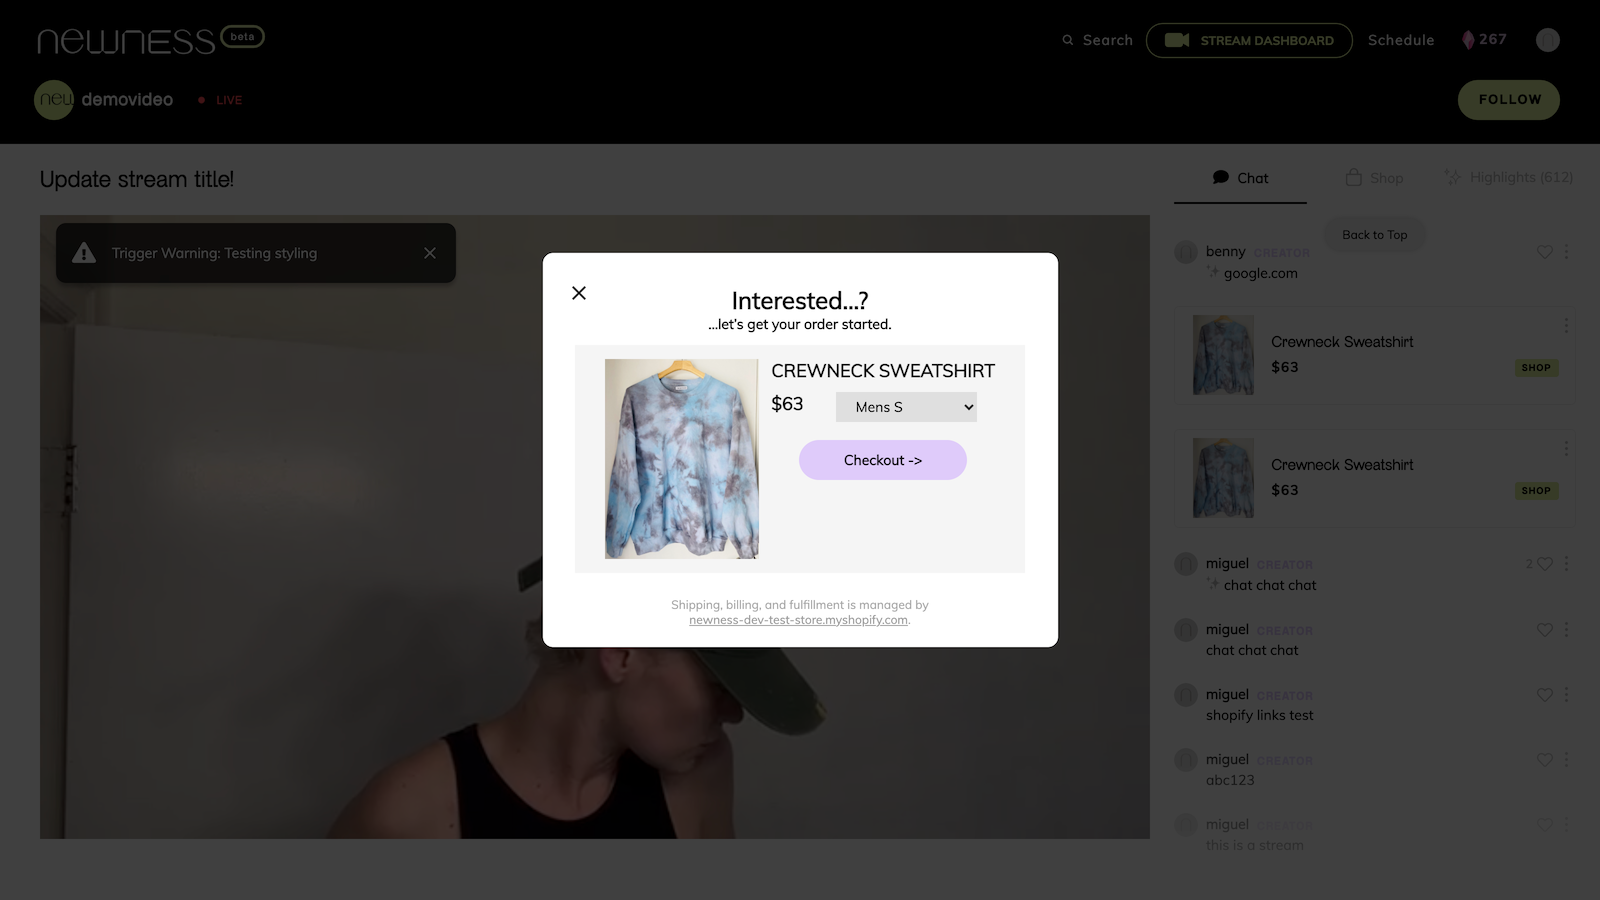 A checkout is started when users click the product in chat.